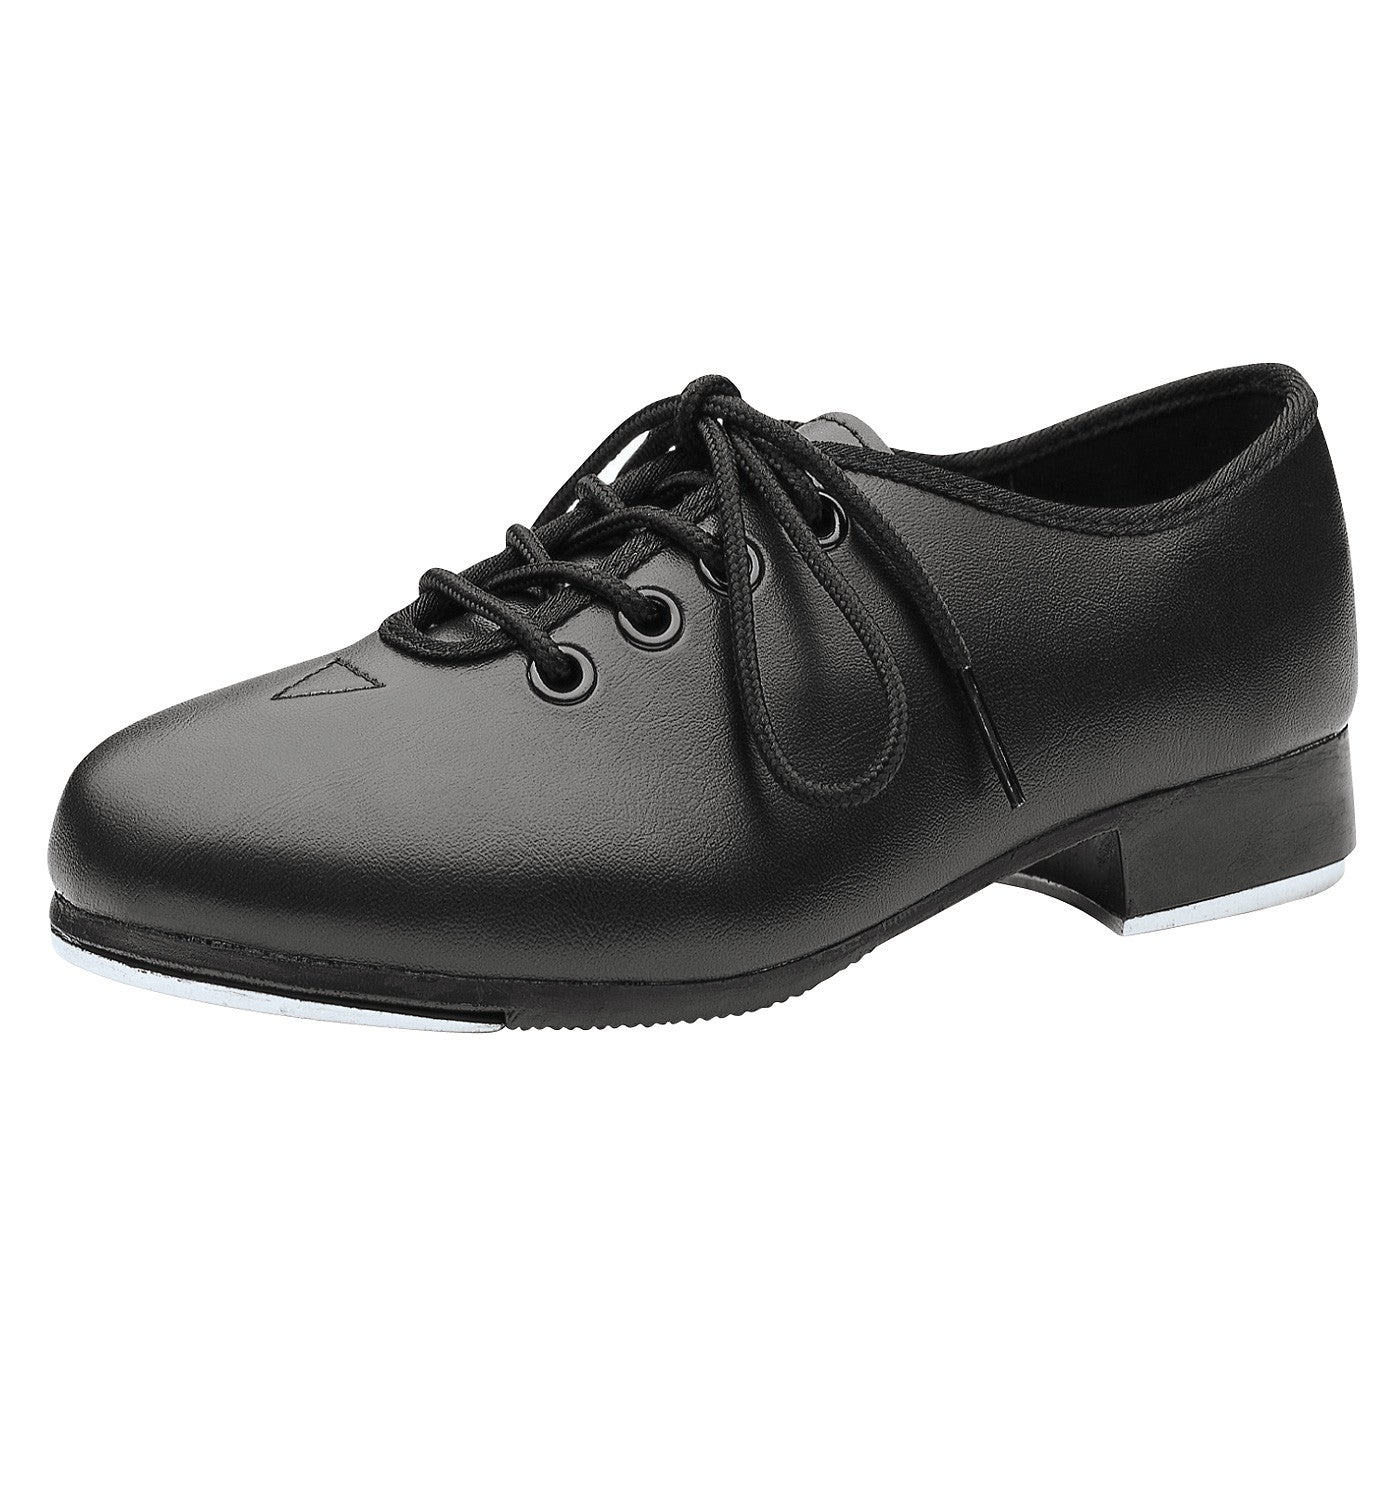 Dance Now Adult Jazz Tap Shoes for Women